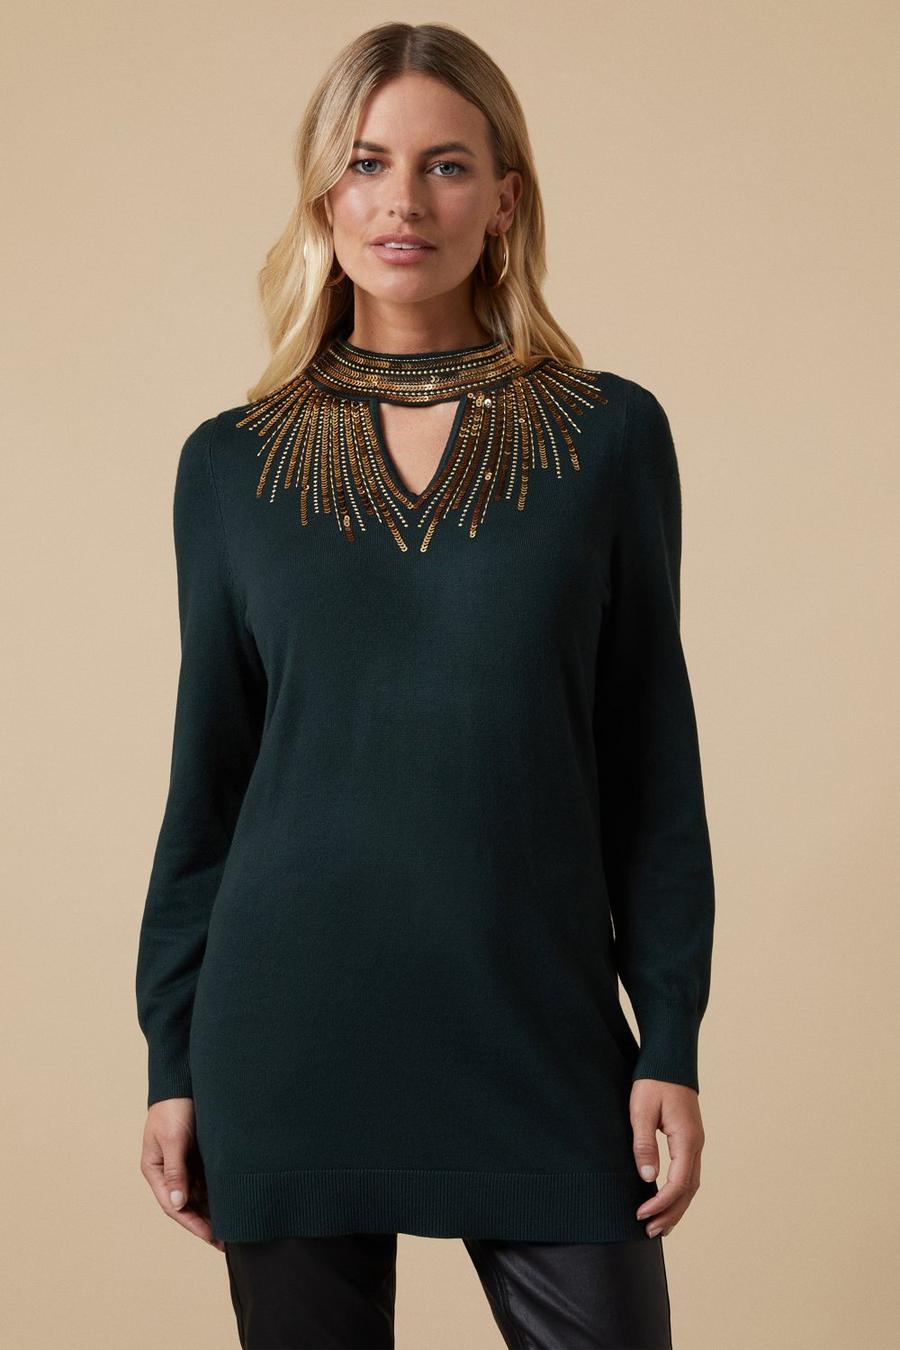 Petite Forest Green Sequin Key Hole Jumper